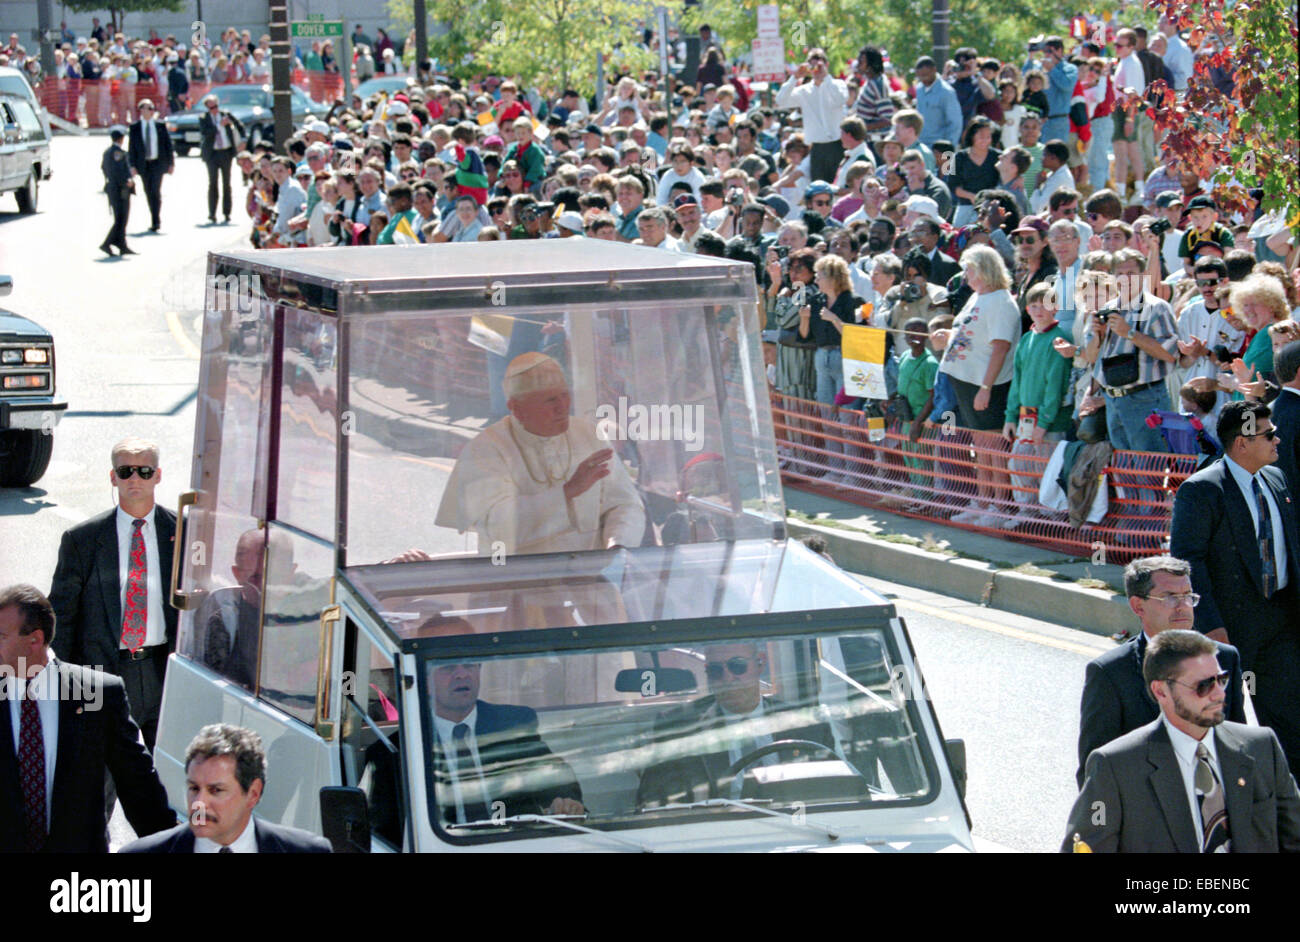 Pope John Paul II waves from inside the popemobile during his visit October 8, 1995 in Baltimore, Maryland. Stock Photo